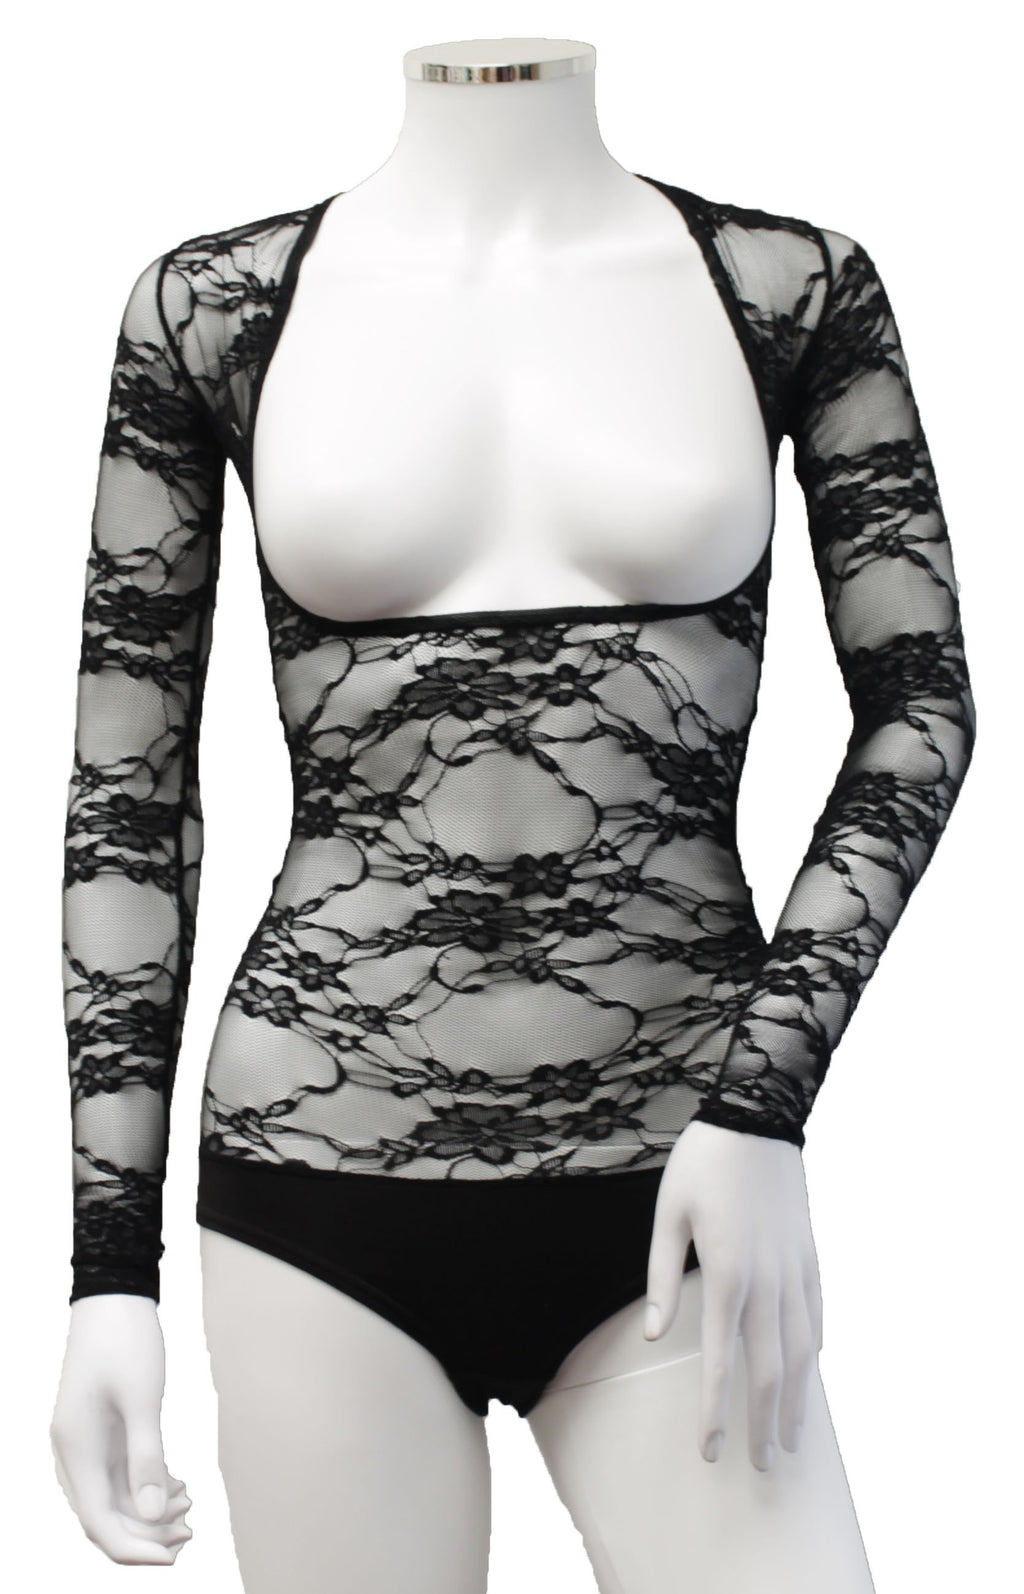 Underbust with Sleeves - Black Lace